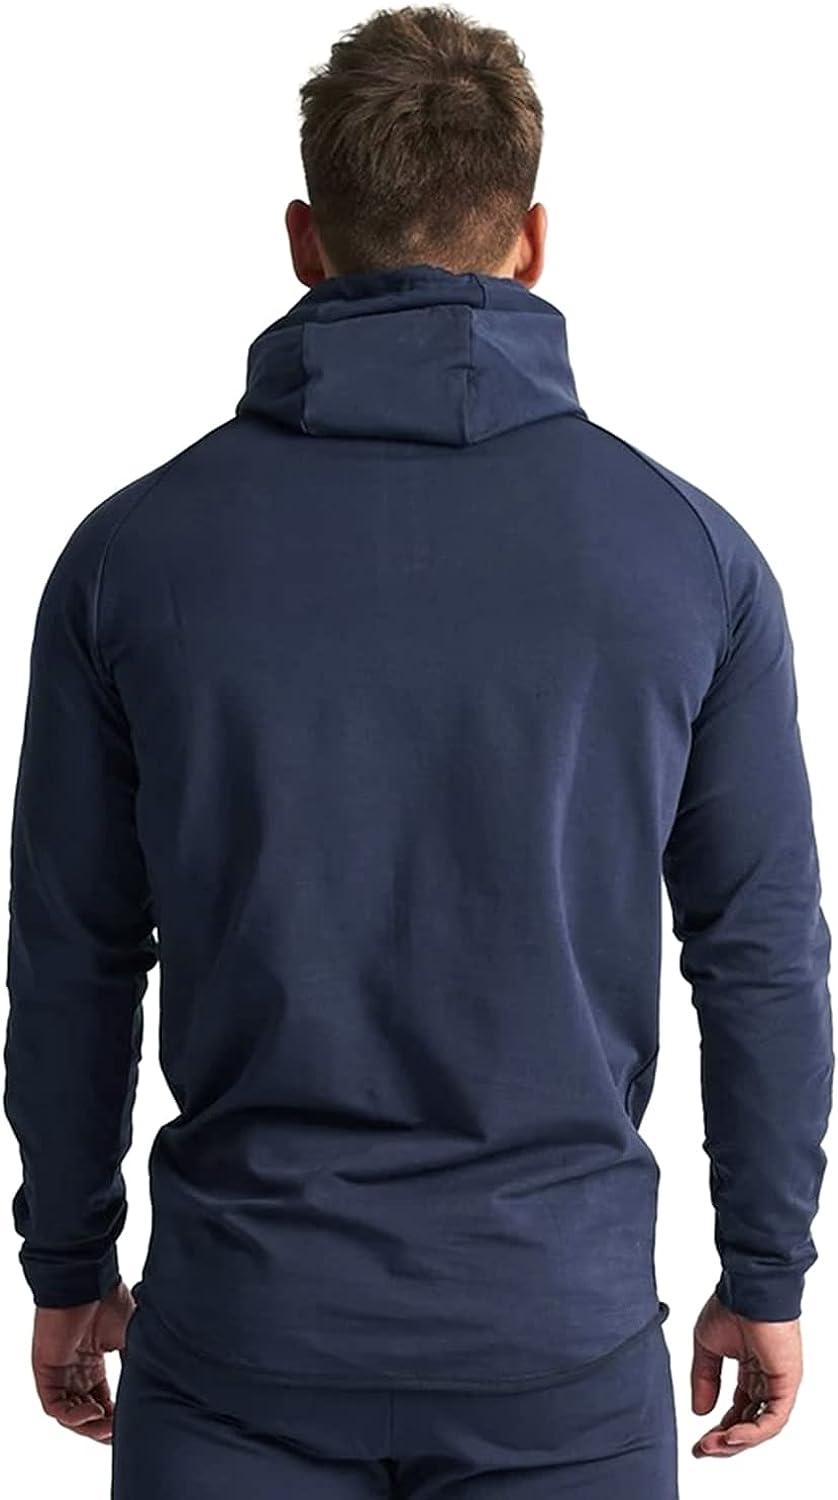 GYMELITE Men's 1/4 Zip Fashion Pullover Hoodie Athletic Workout Fit Cotton  Hooed Sweatshirts Casual Long Sleeve with Pocket Navy Blue XX-Large